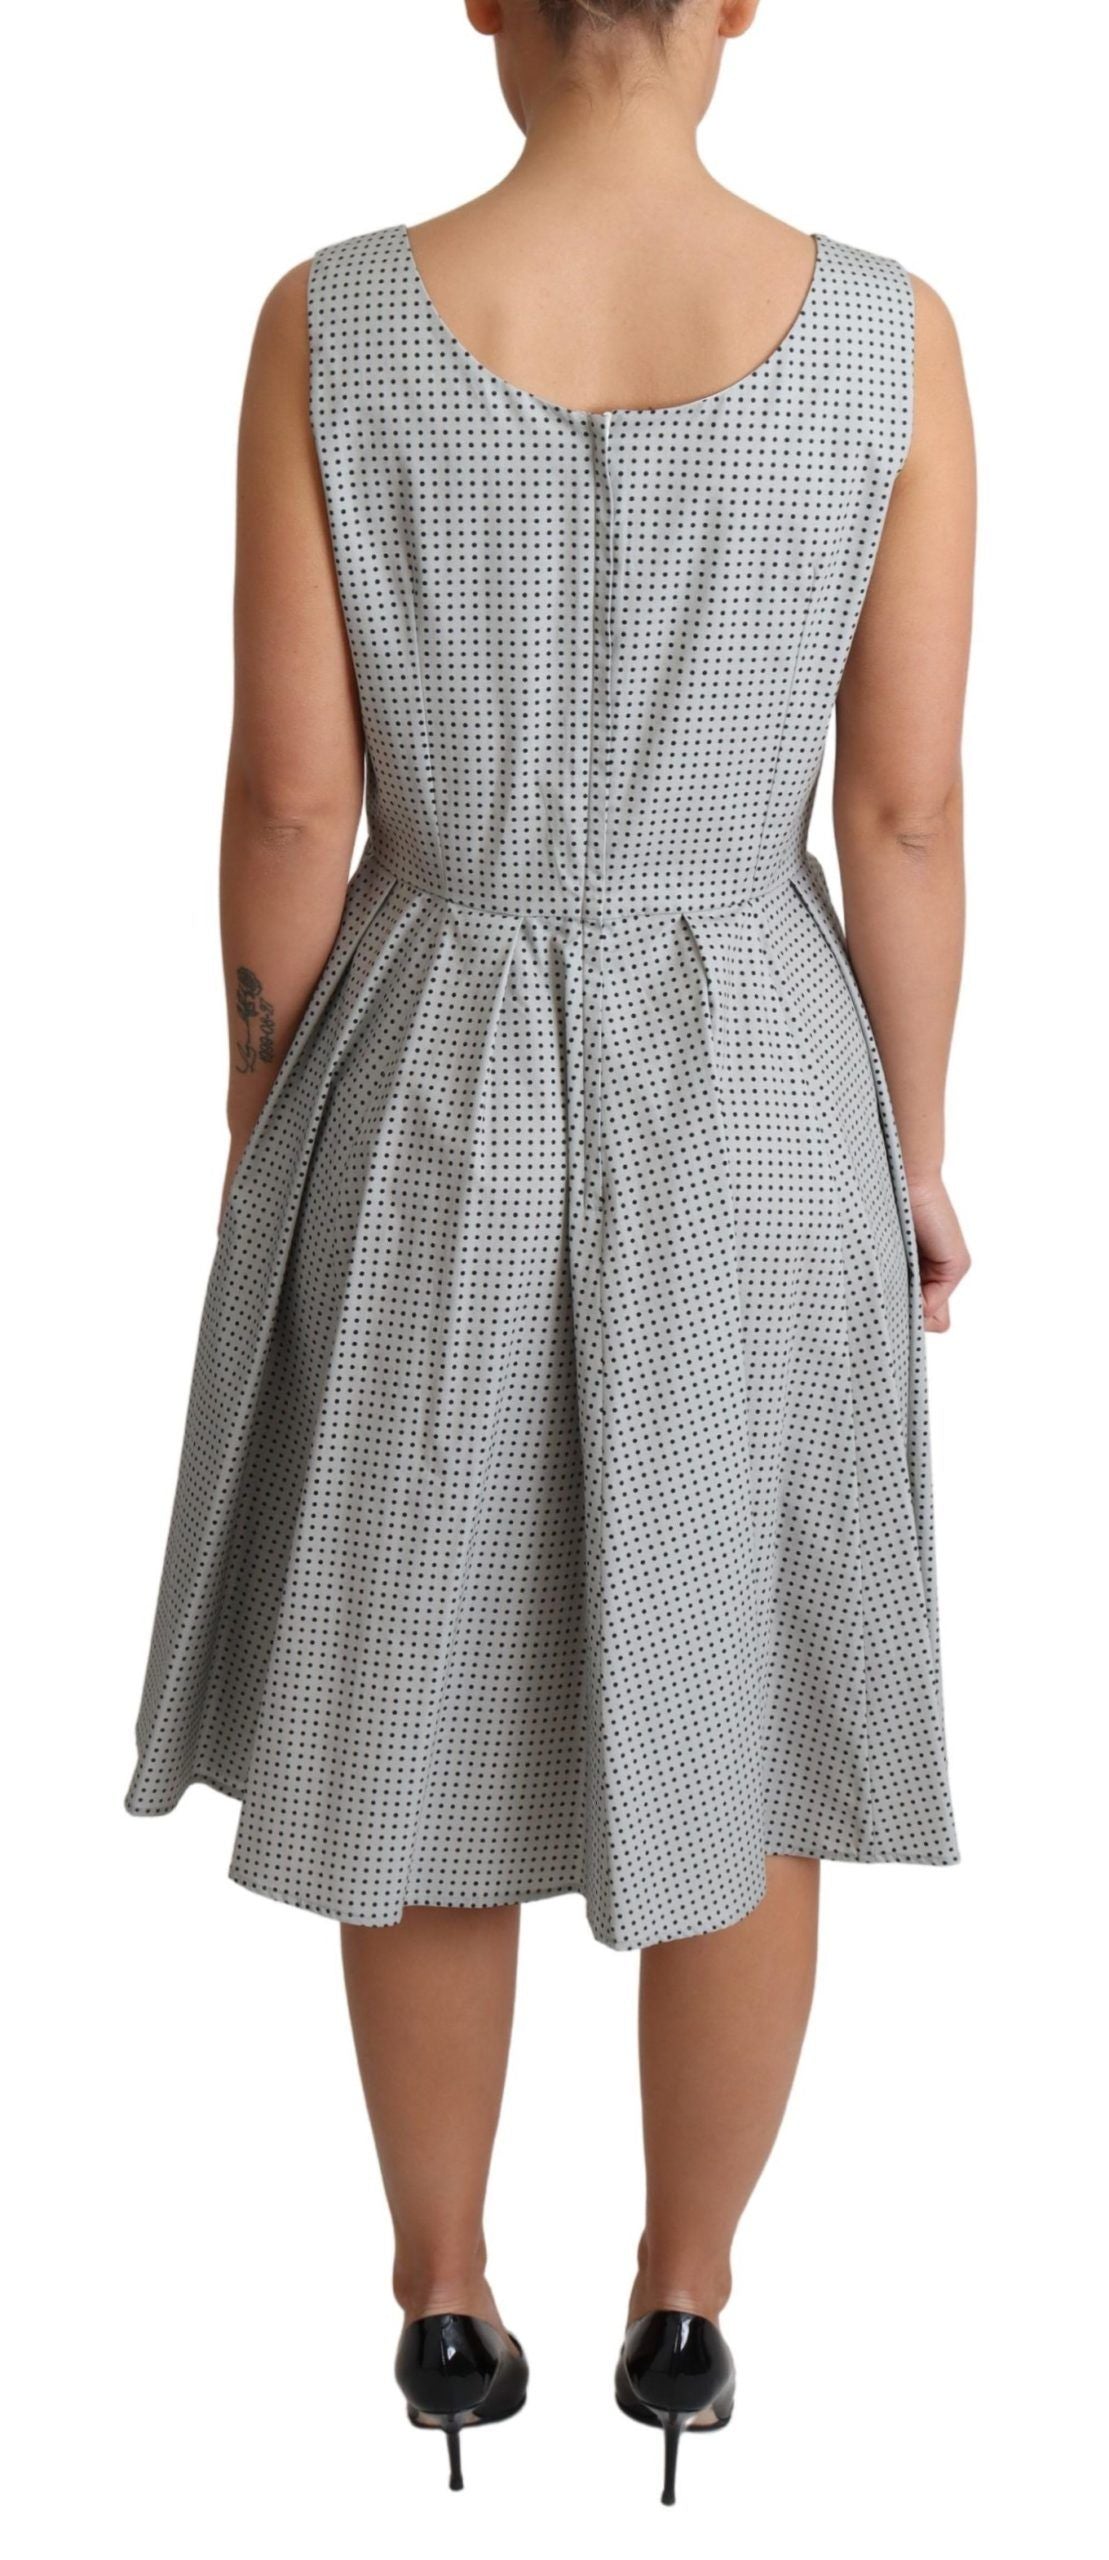 Chic Polka Dotted Sleeveless A-Line Dress